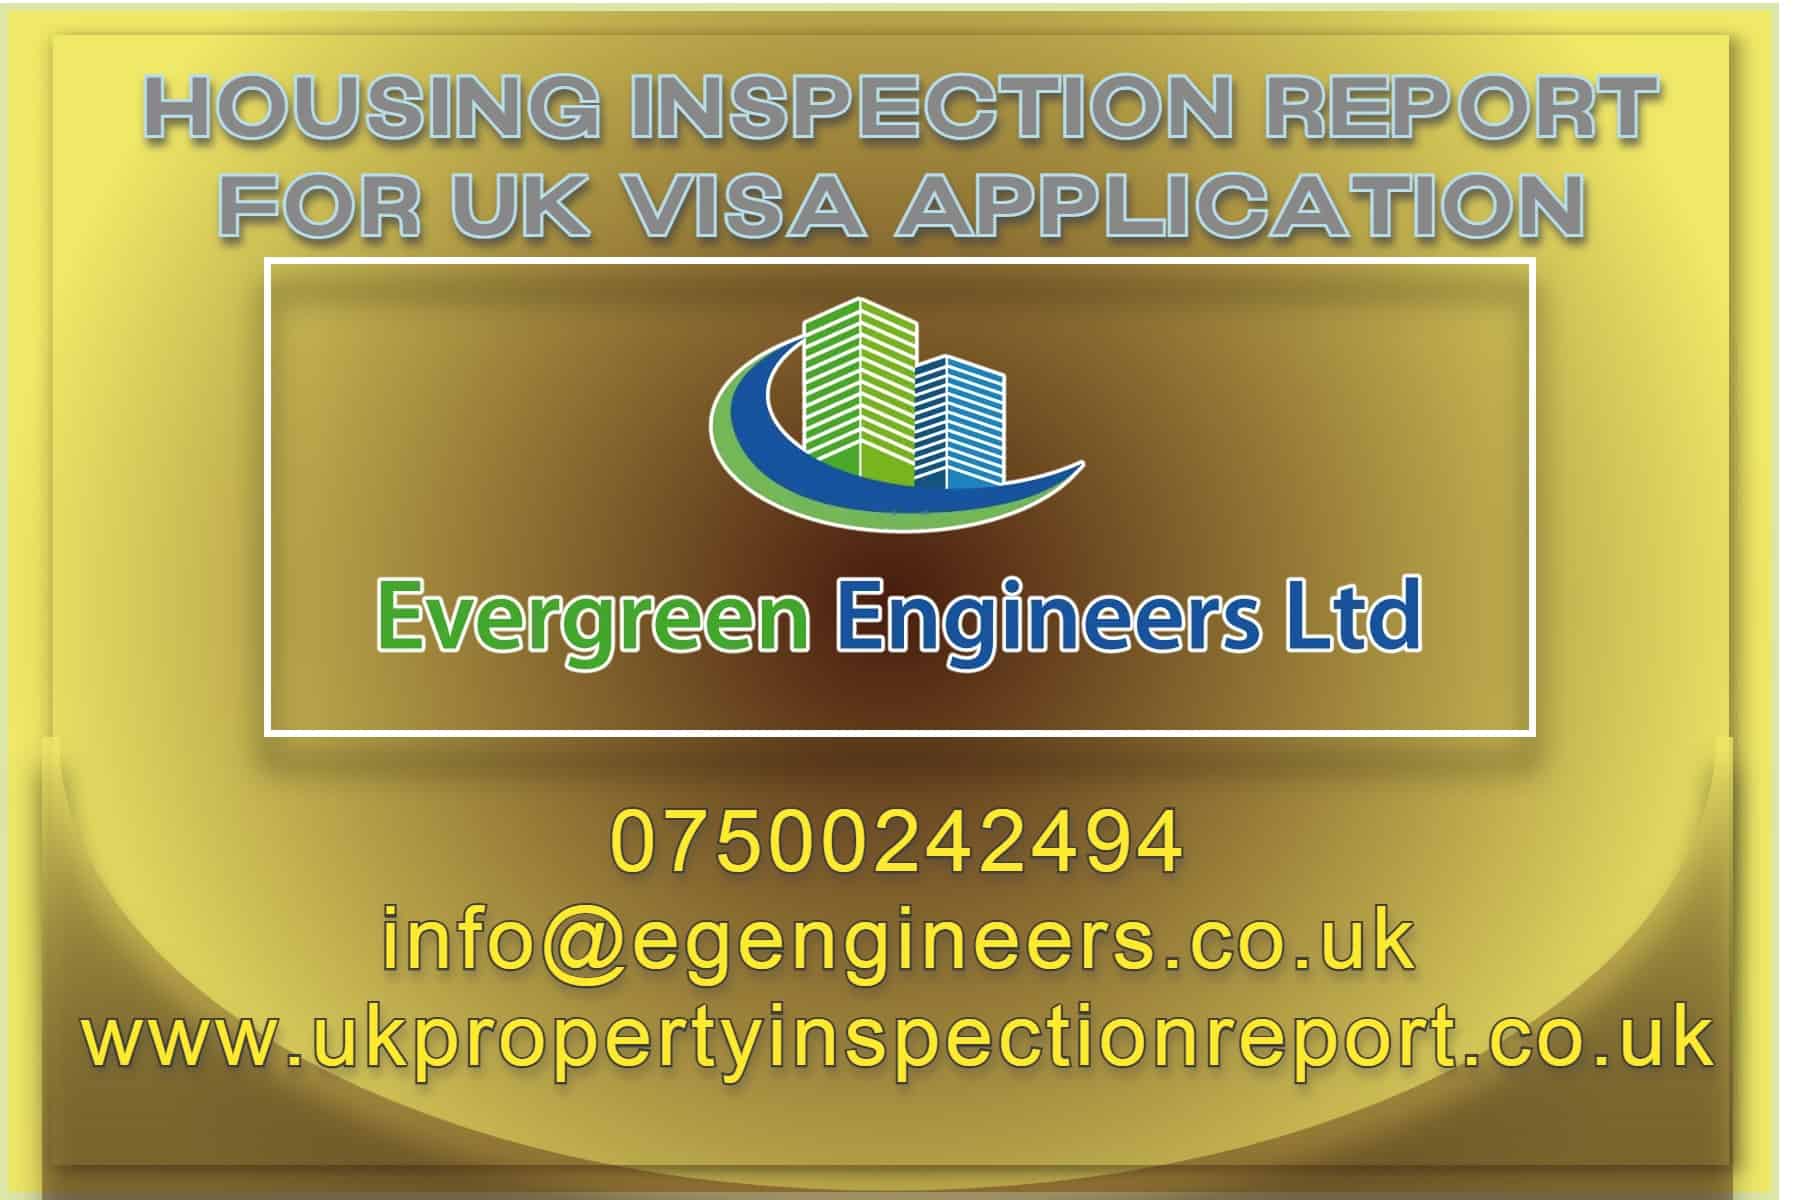 Who can do a property inspection report for UK visa and Immigration